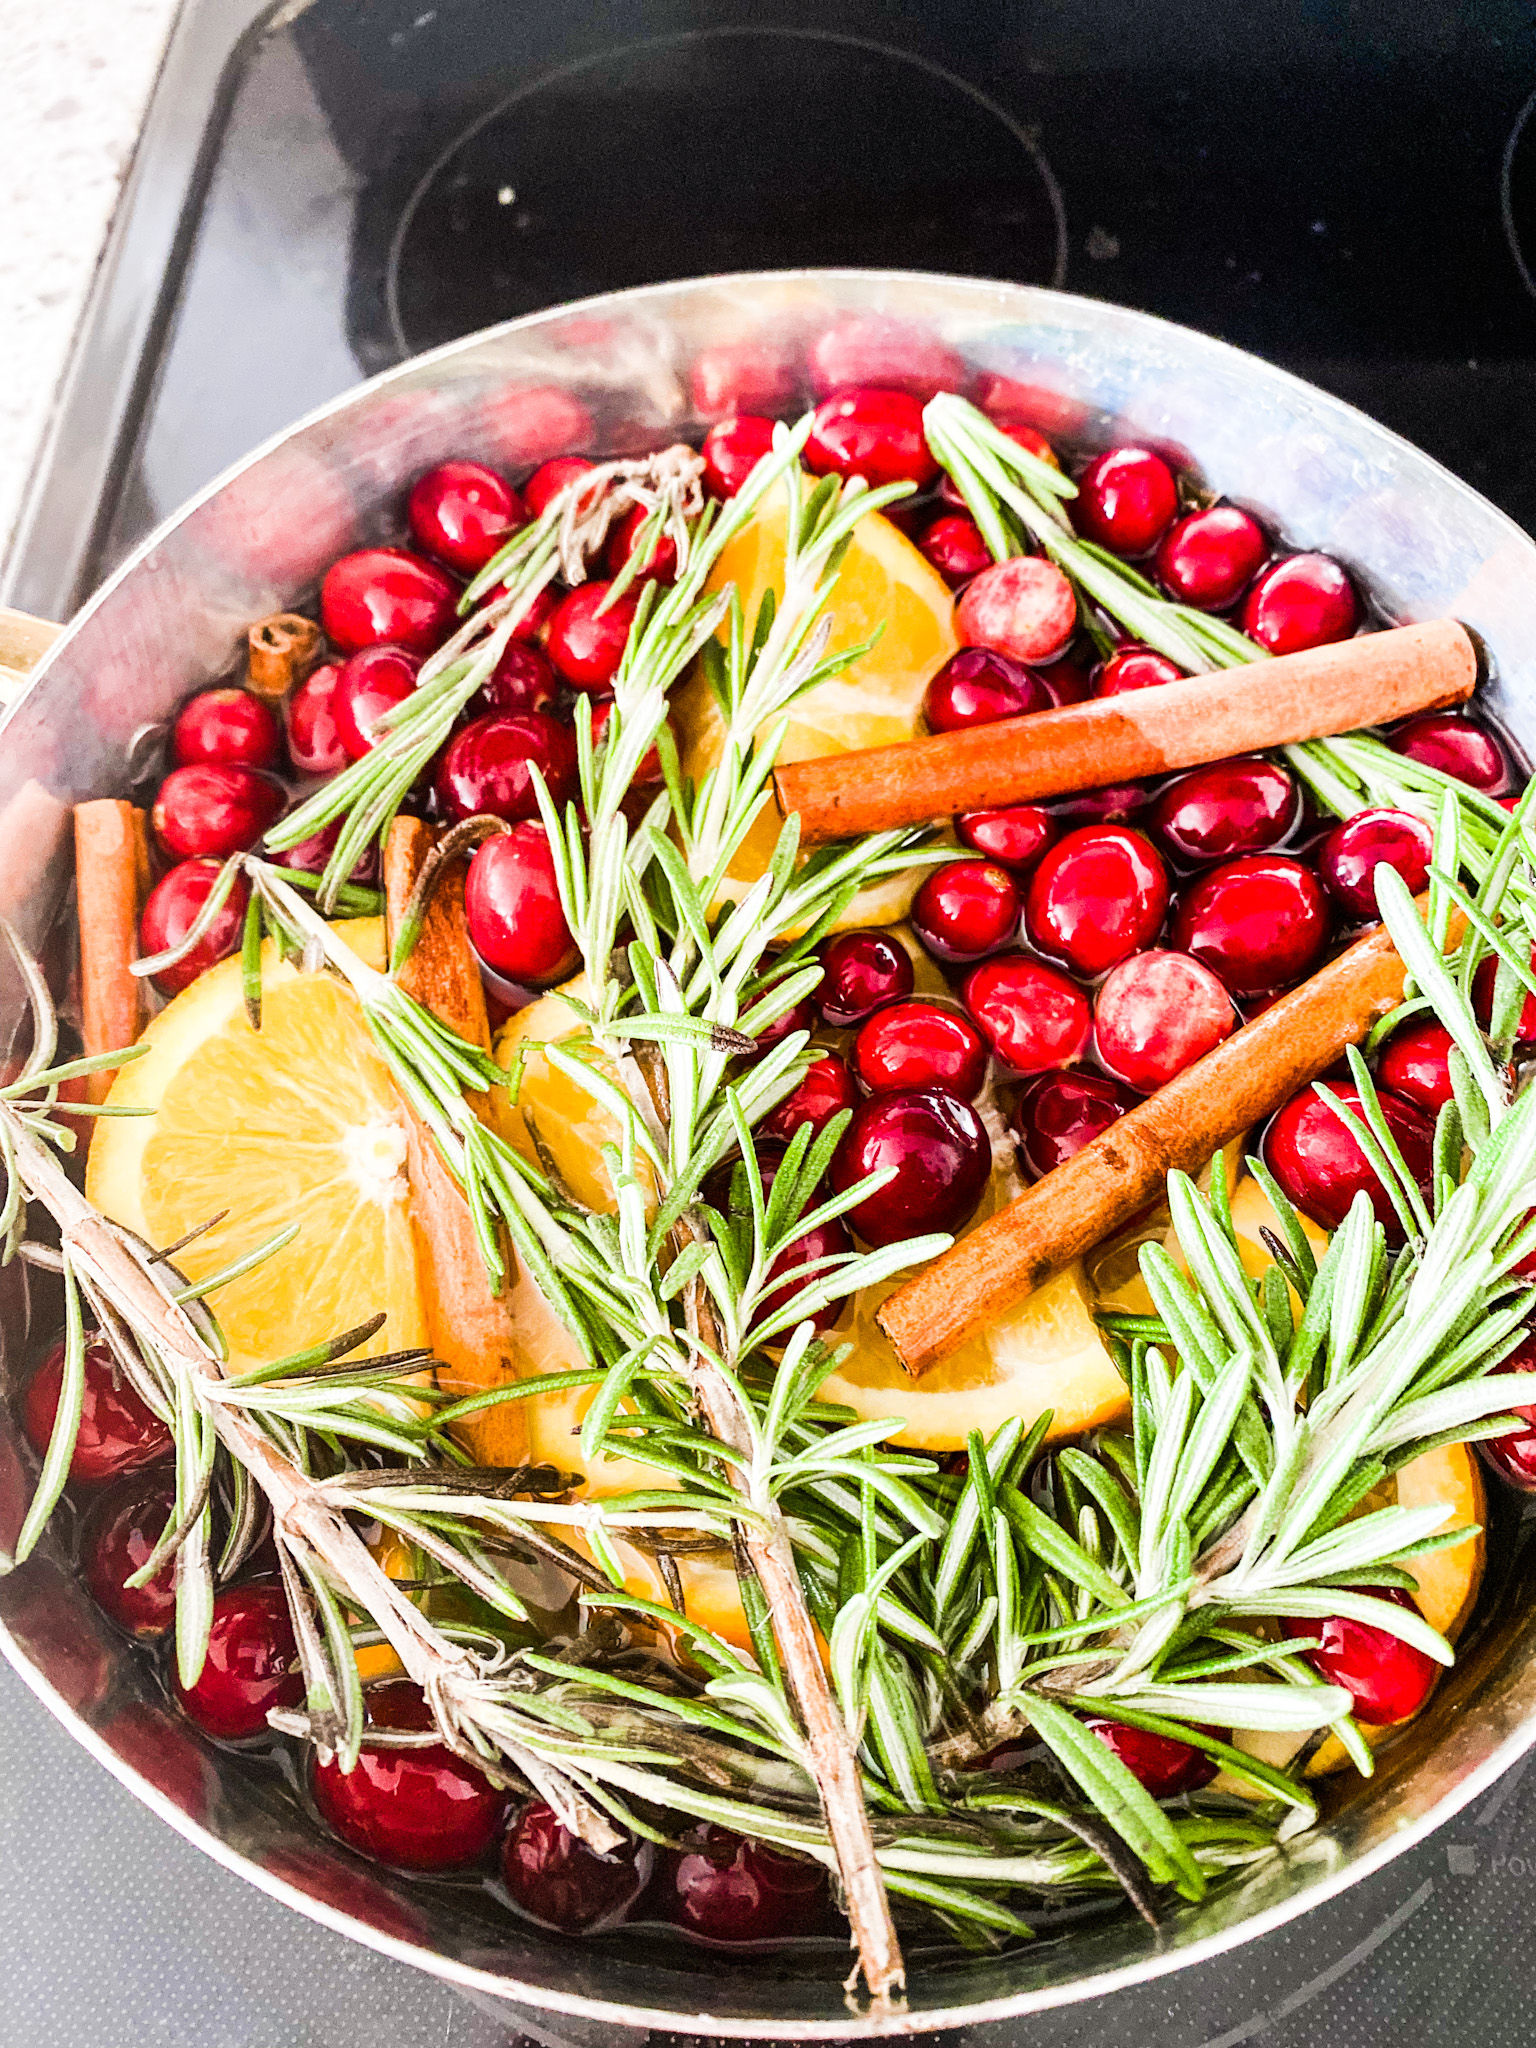 Copper pot with cranberries, oranges, cinnamon sticks, and rosemary